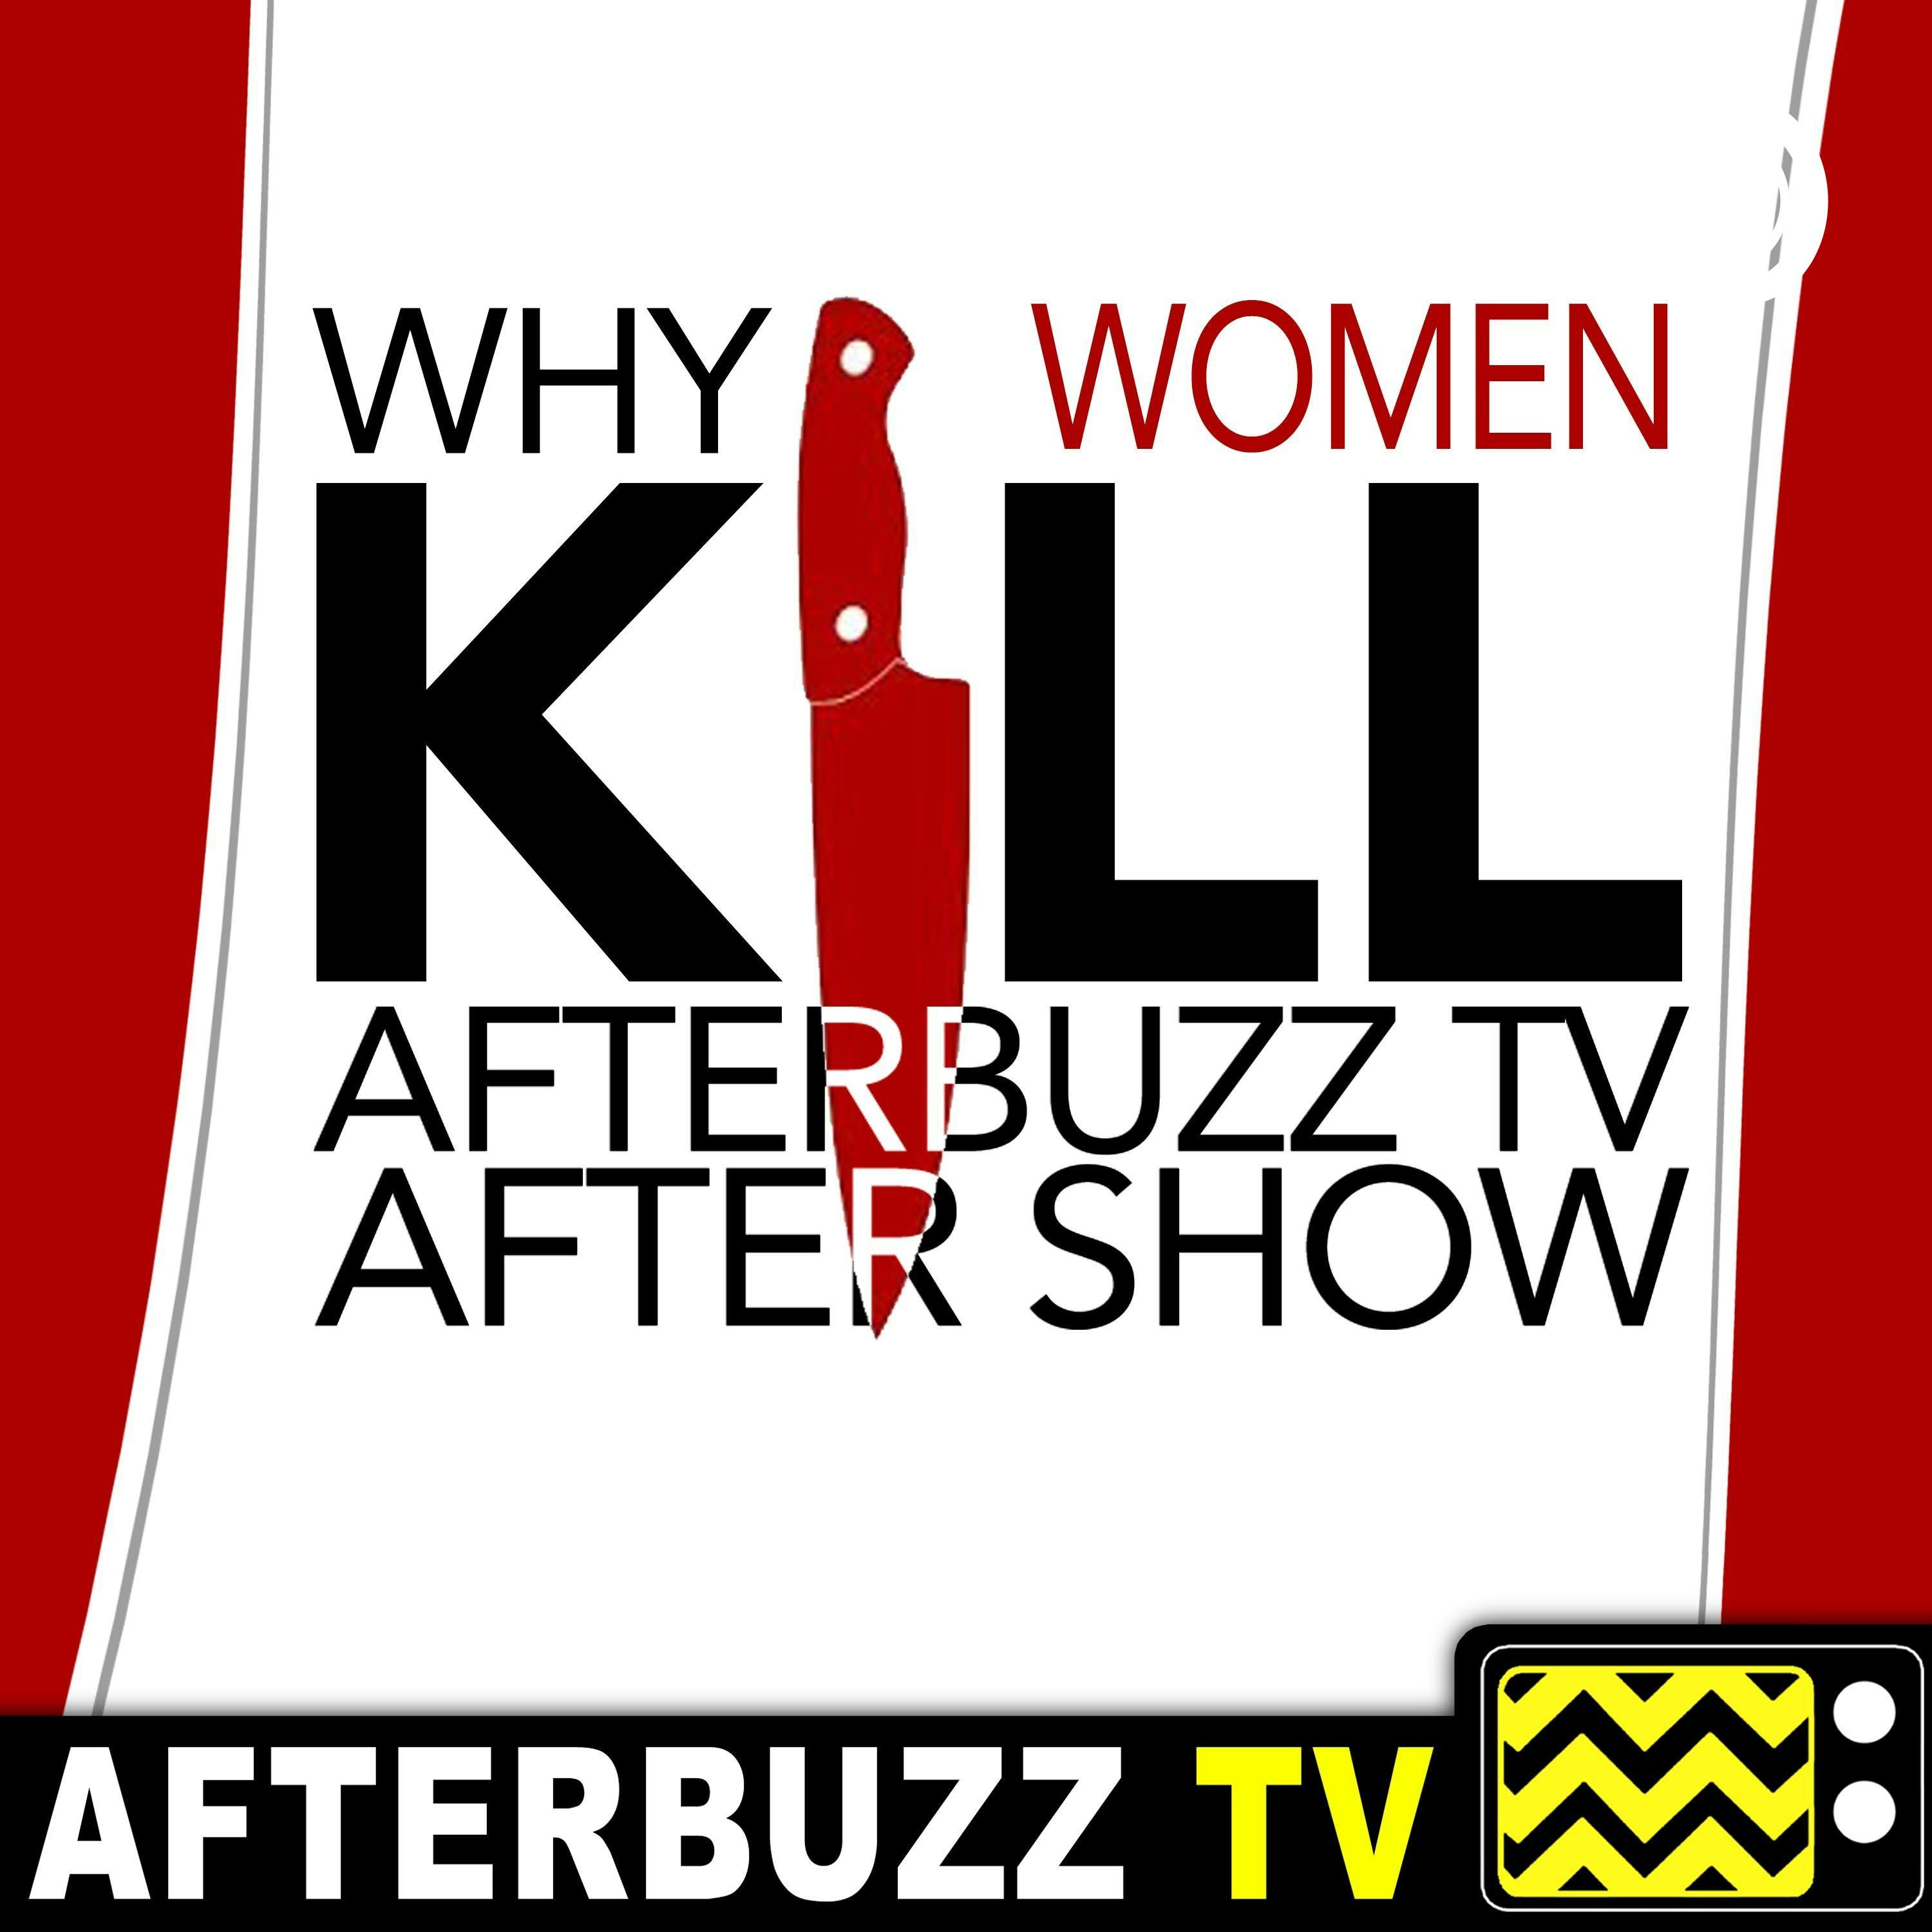 ”I’d Like to Kill Ya, but I Just Washed My Hair” Season 1 Episode 2 ’Why Women Kill’ Review